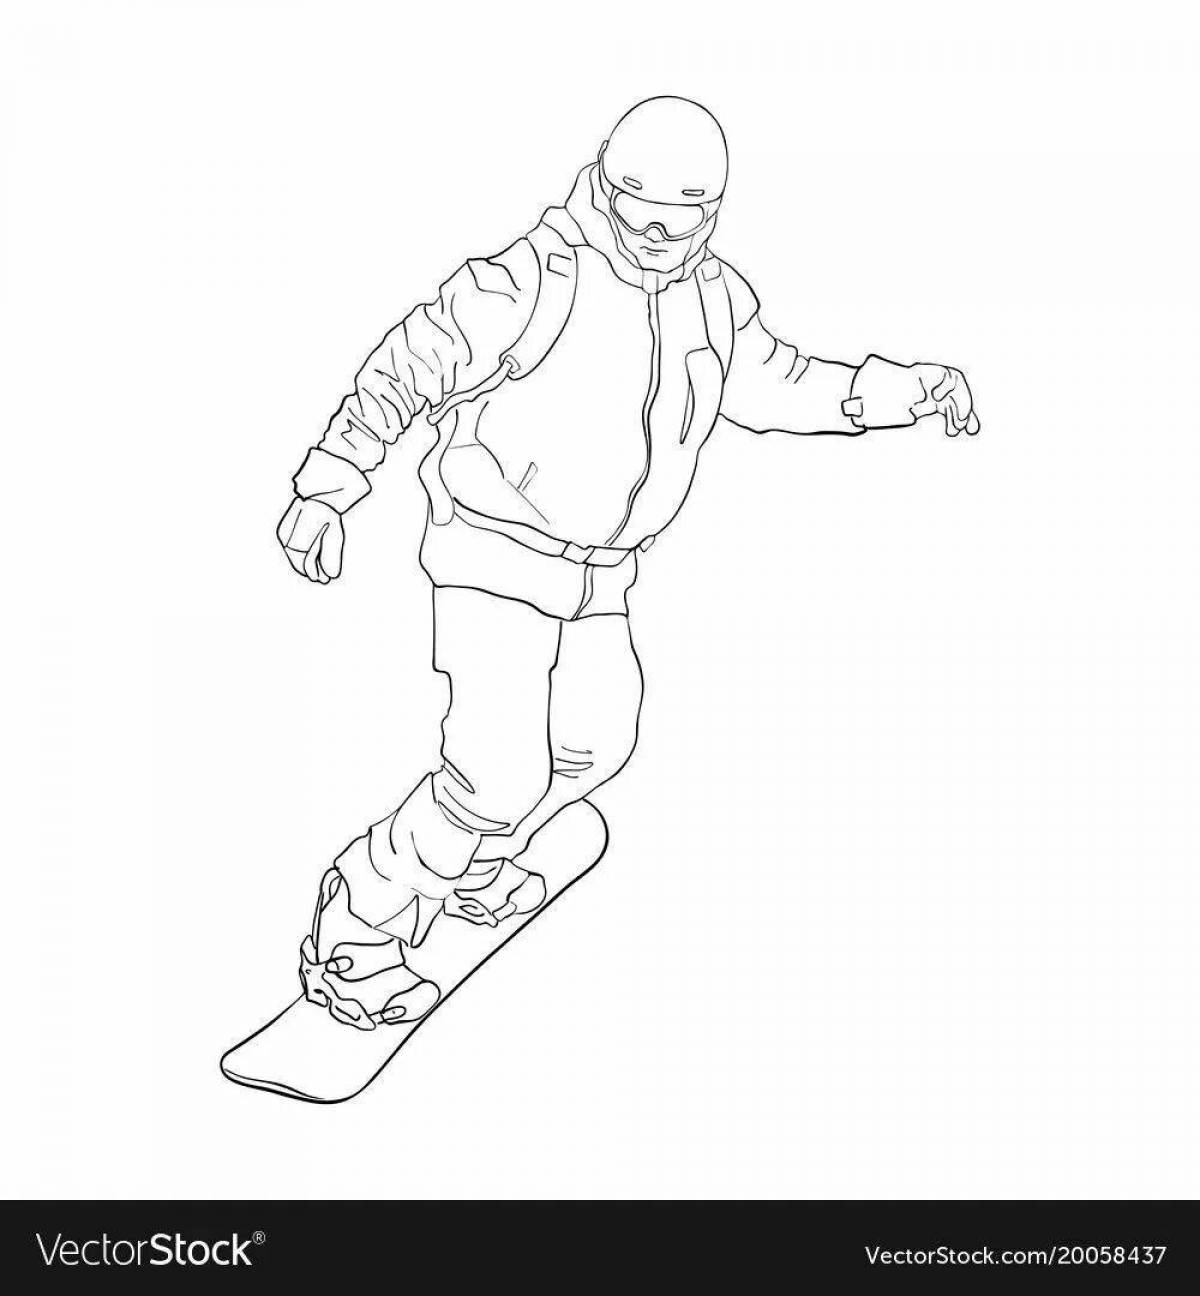 Snowboard coloring pages for kids